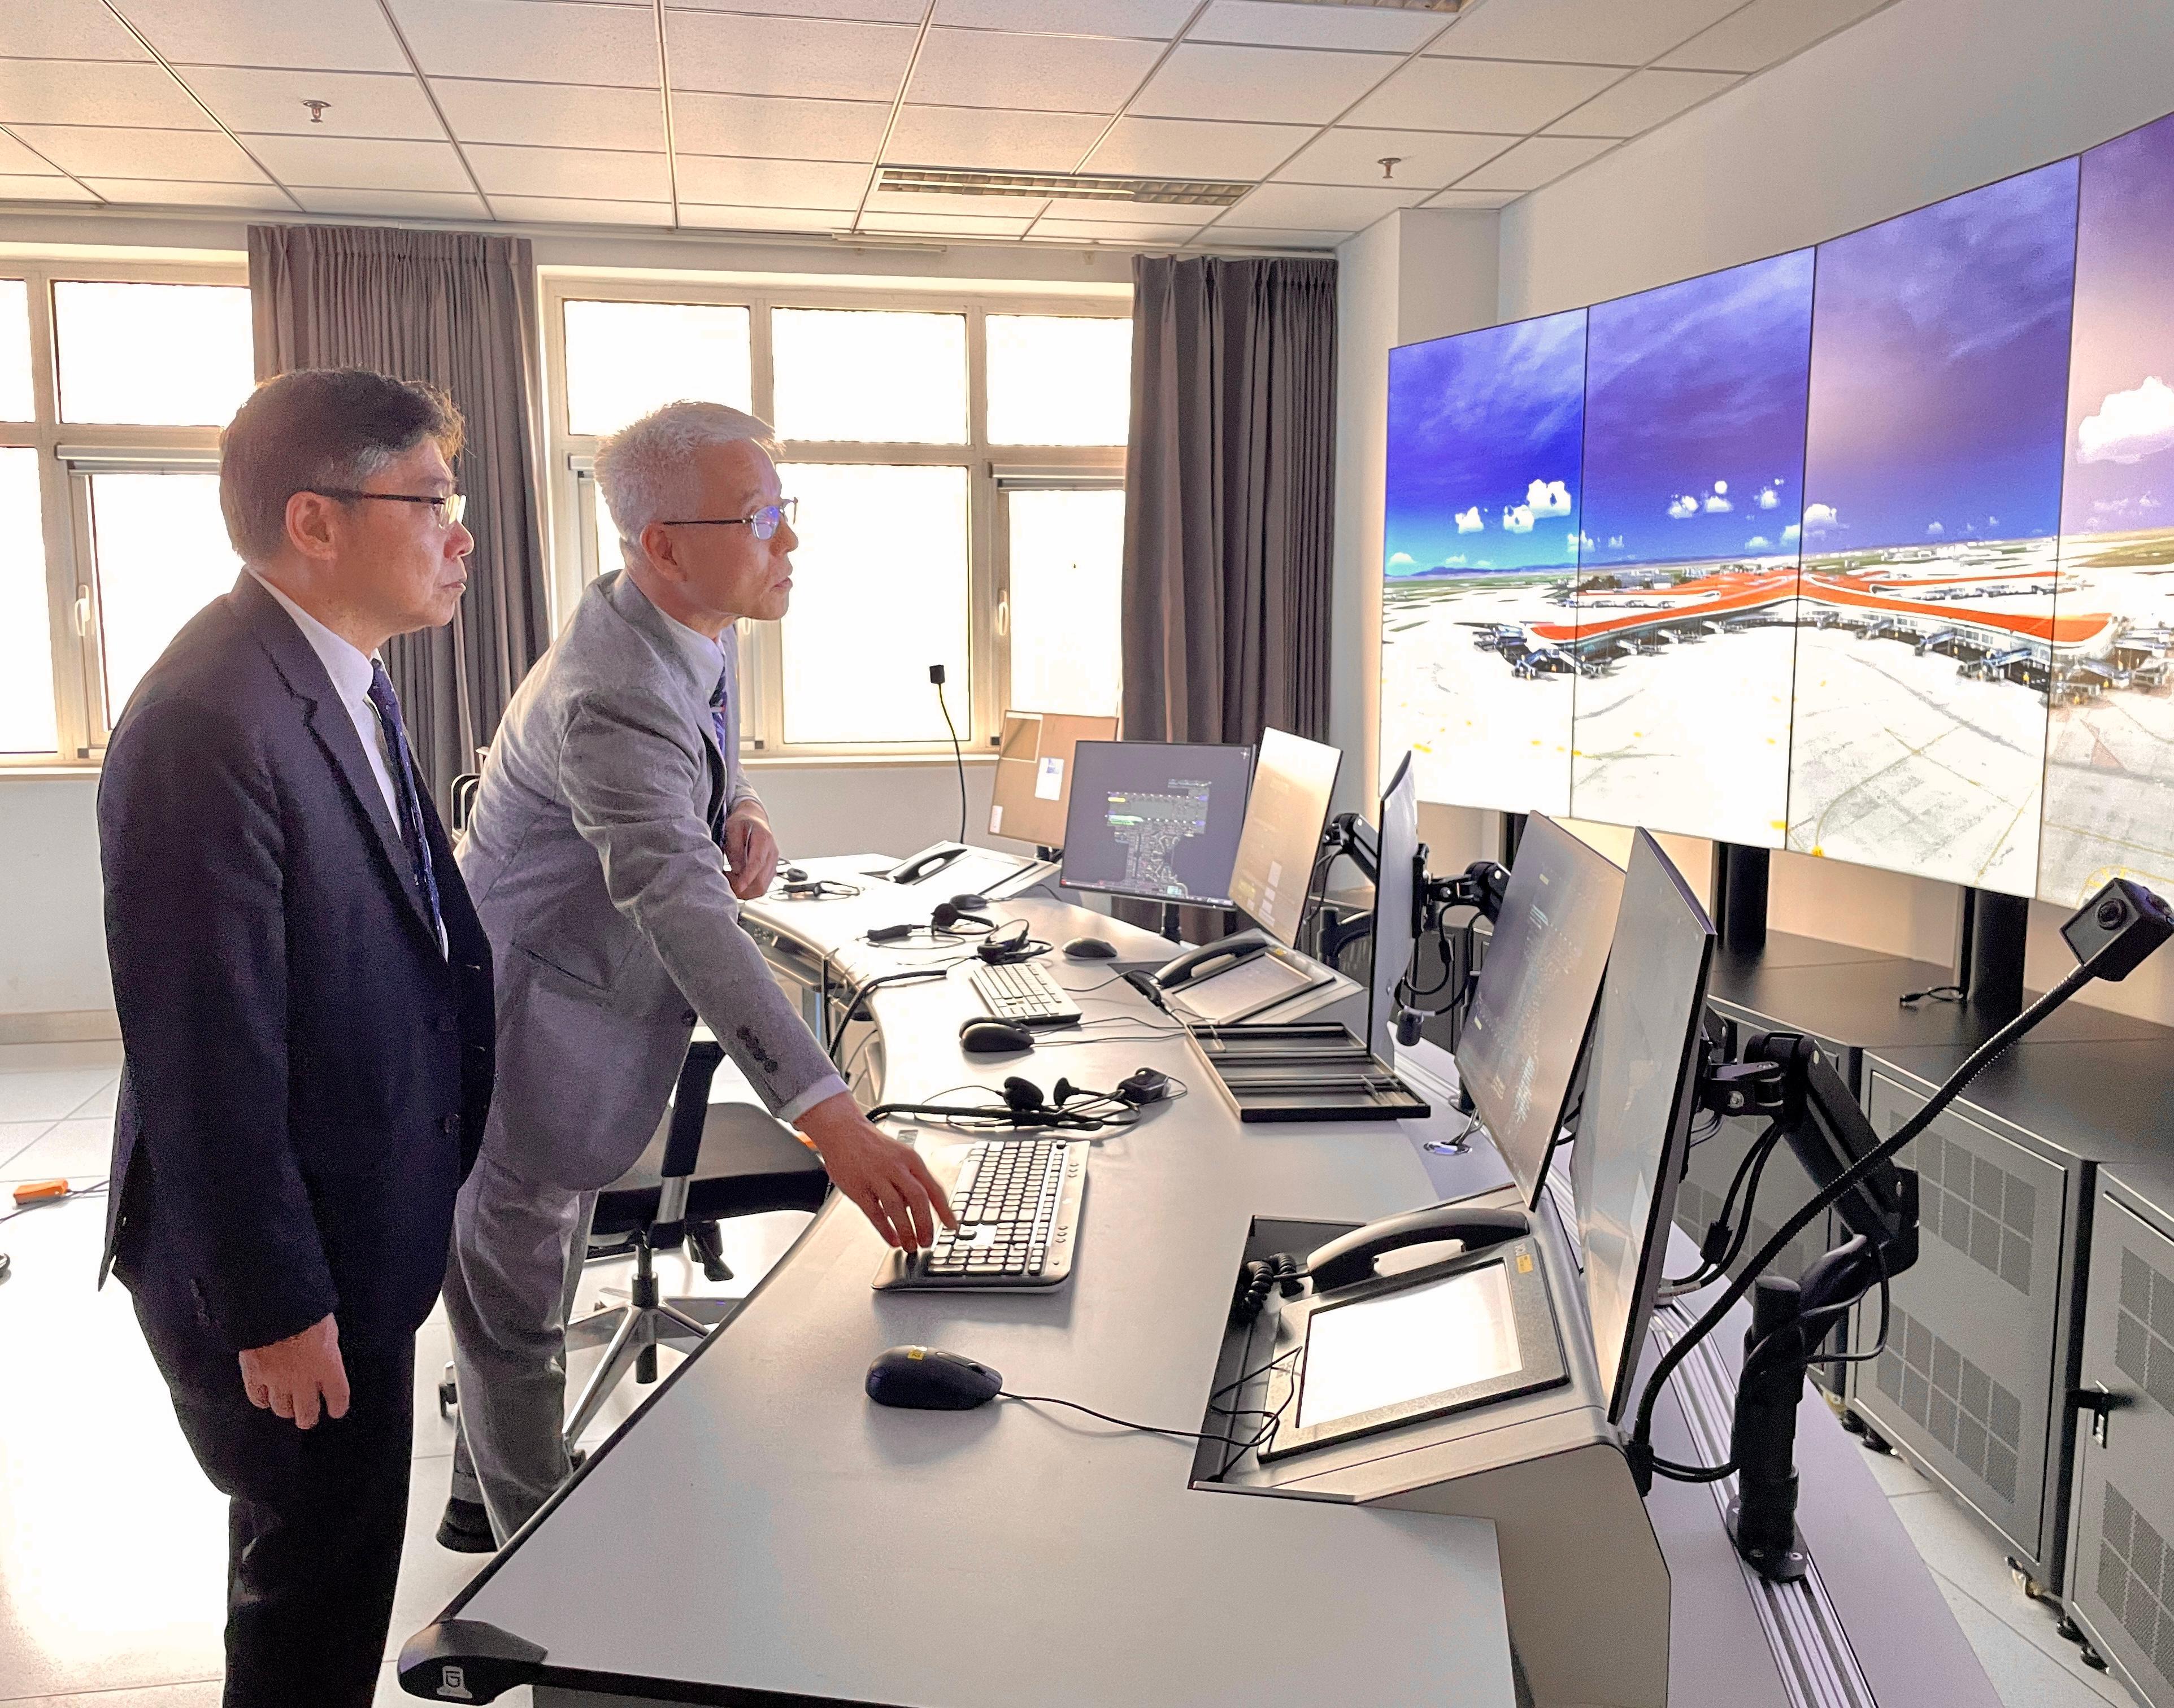 The Secretary for Transport and Logistics, Mr Lam Sai-hung, visited Beijing Daxing International Airport yesterday (April 9). Photo shows Mr Lam (left) receiving a briefing about the desktop tower control simulator.